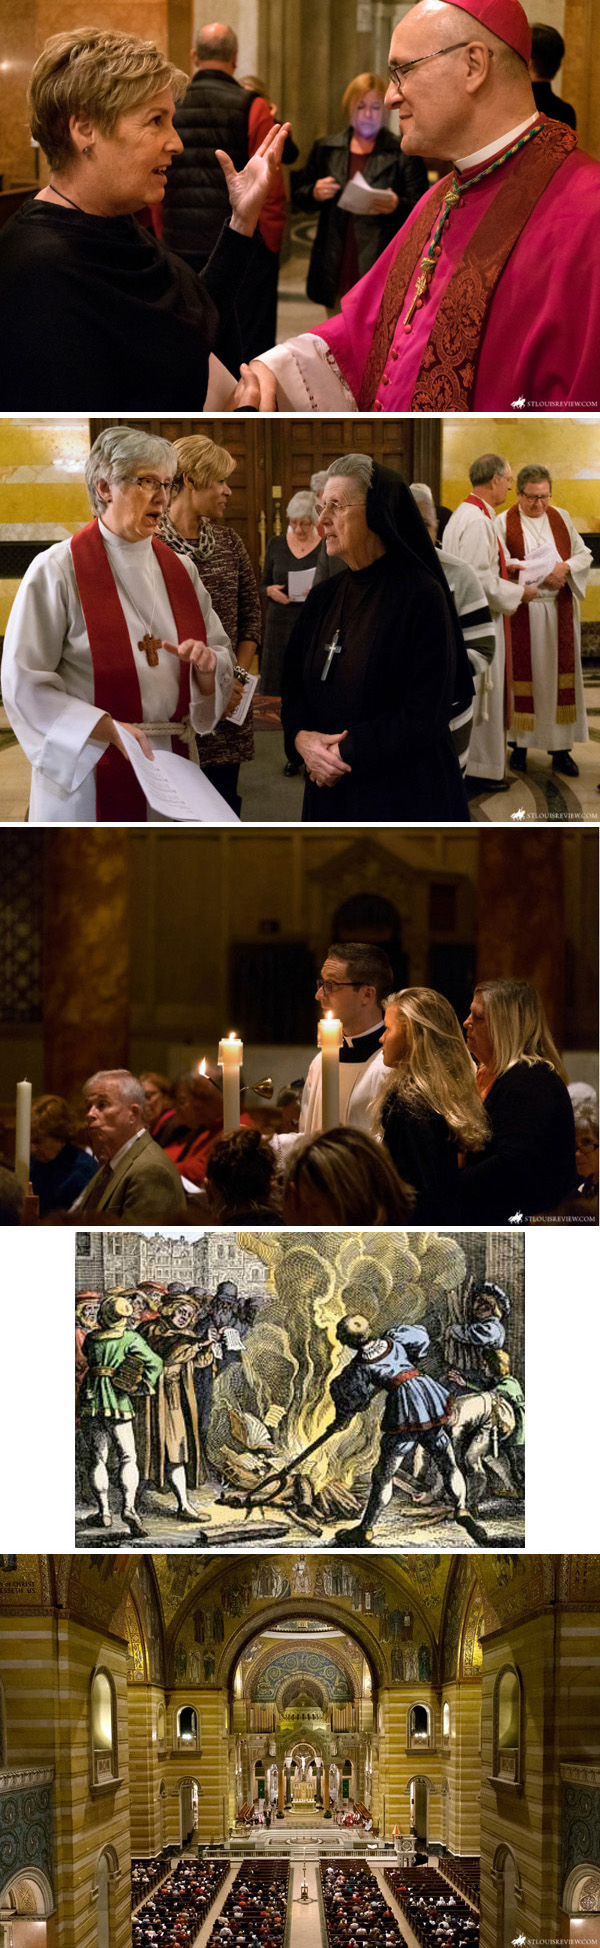 photo collage of Protestants at St. Louis Cathedral and ecumenism with protestants